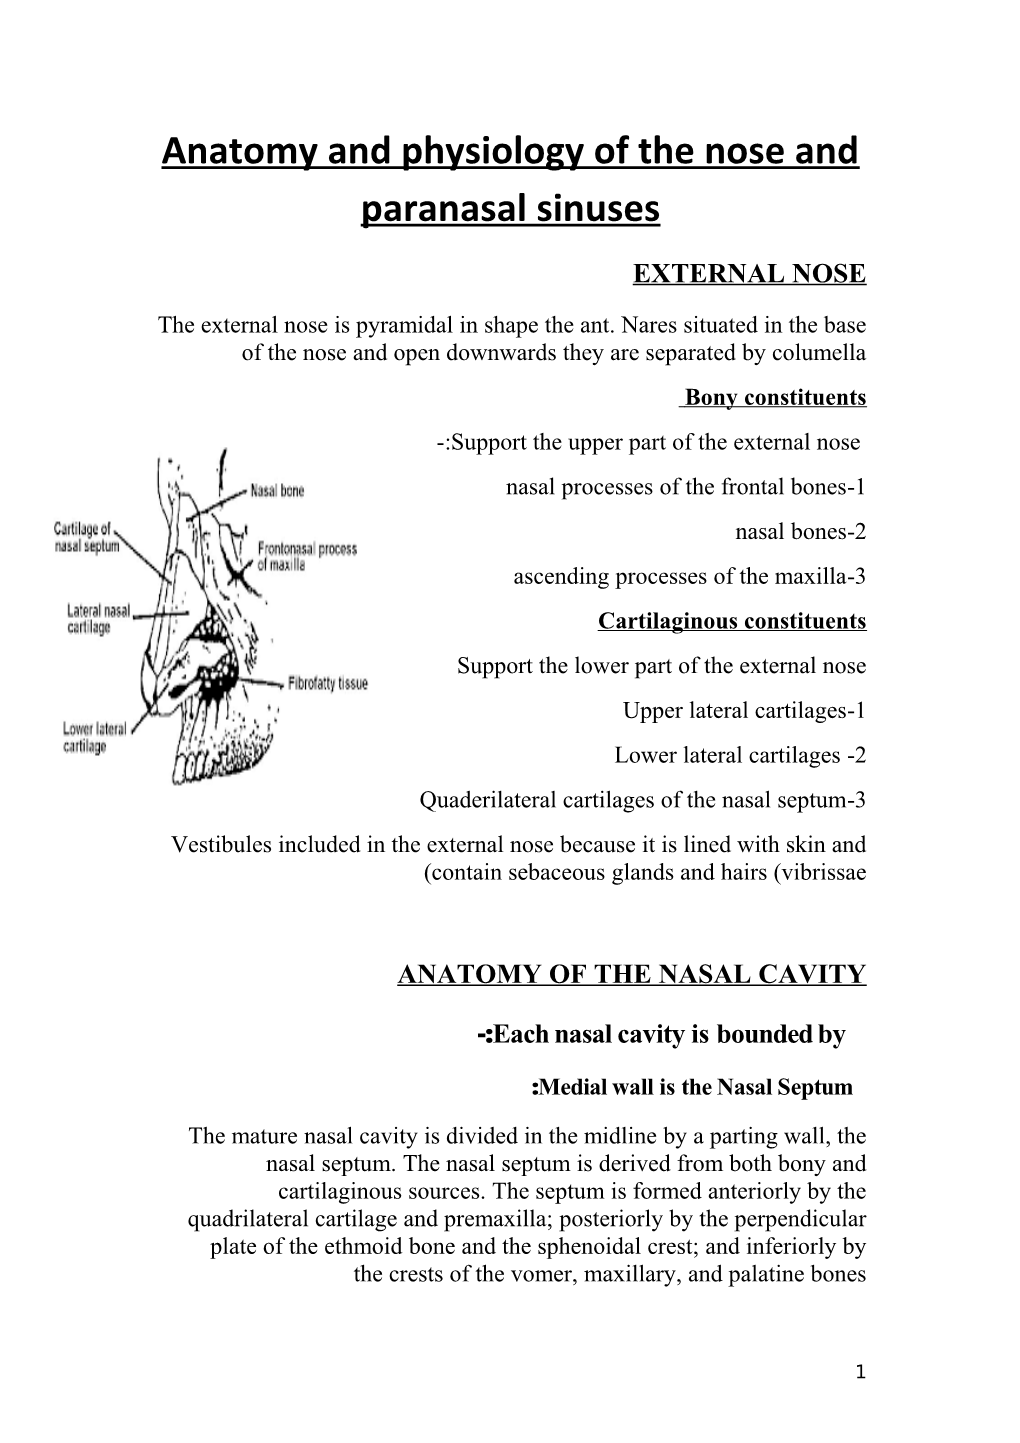 Anatomy and Physiology of the Nose and Paranasal Sinuses